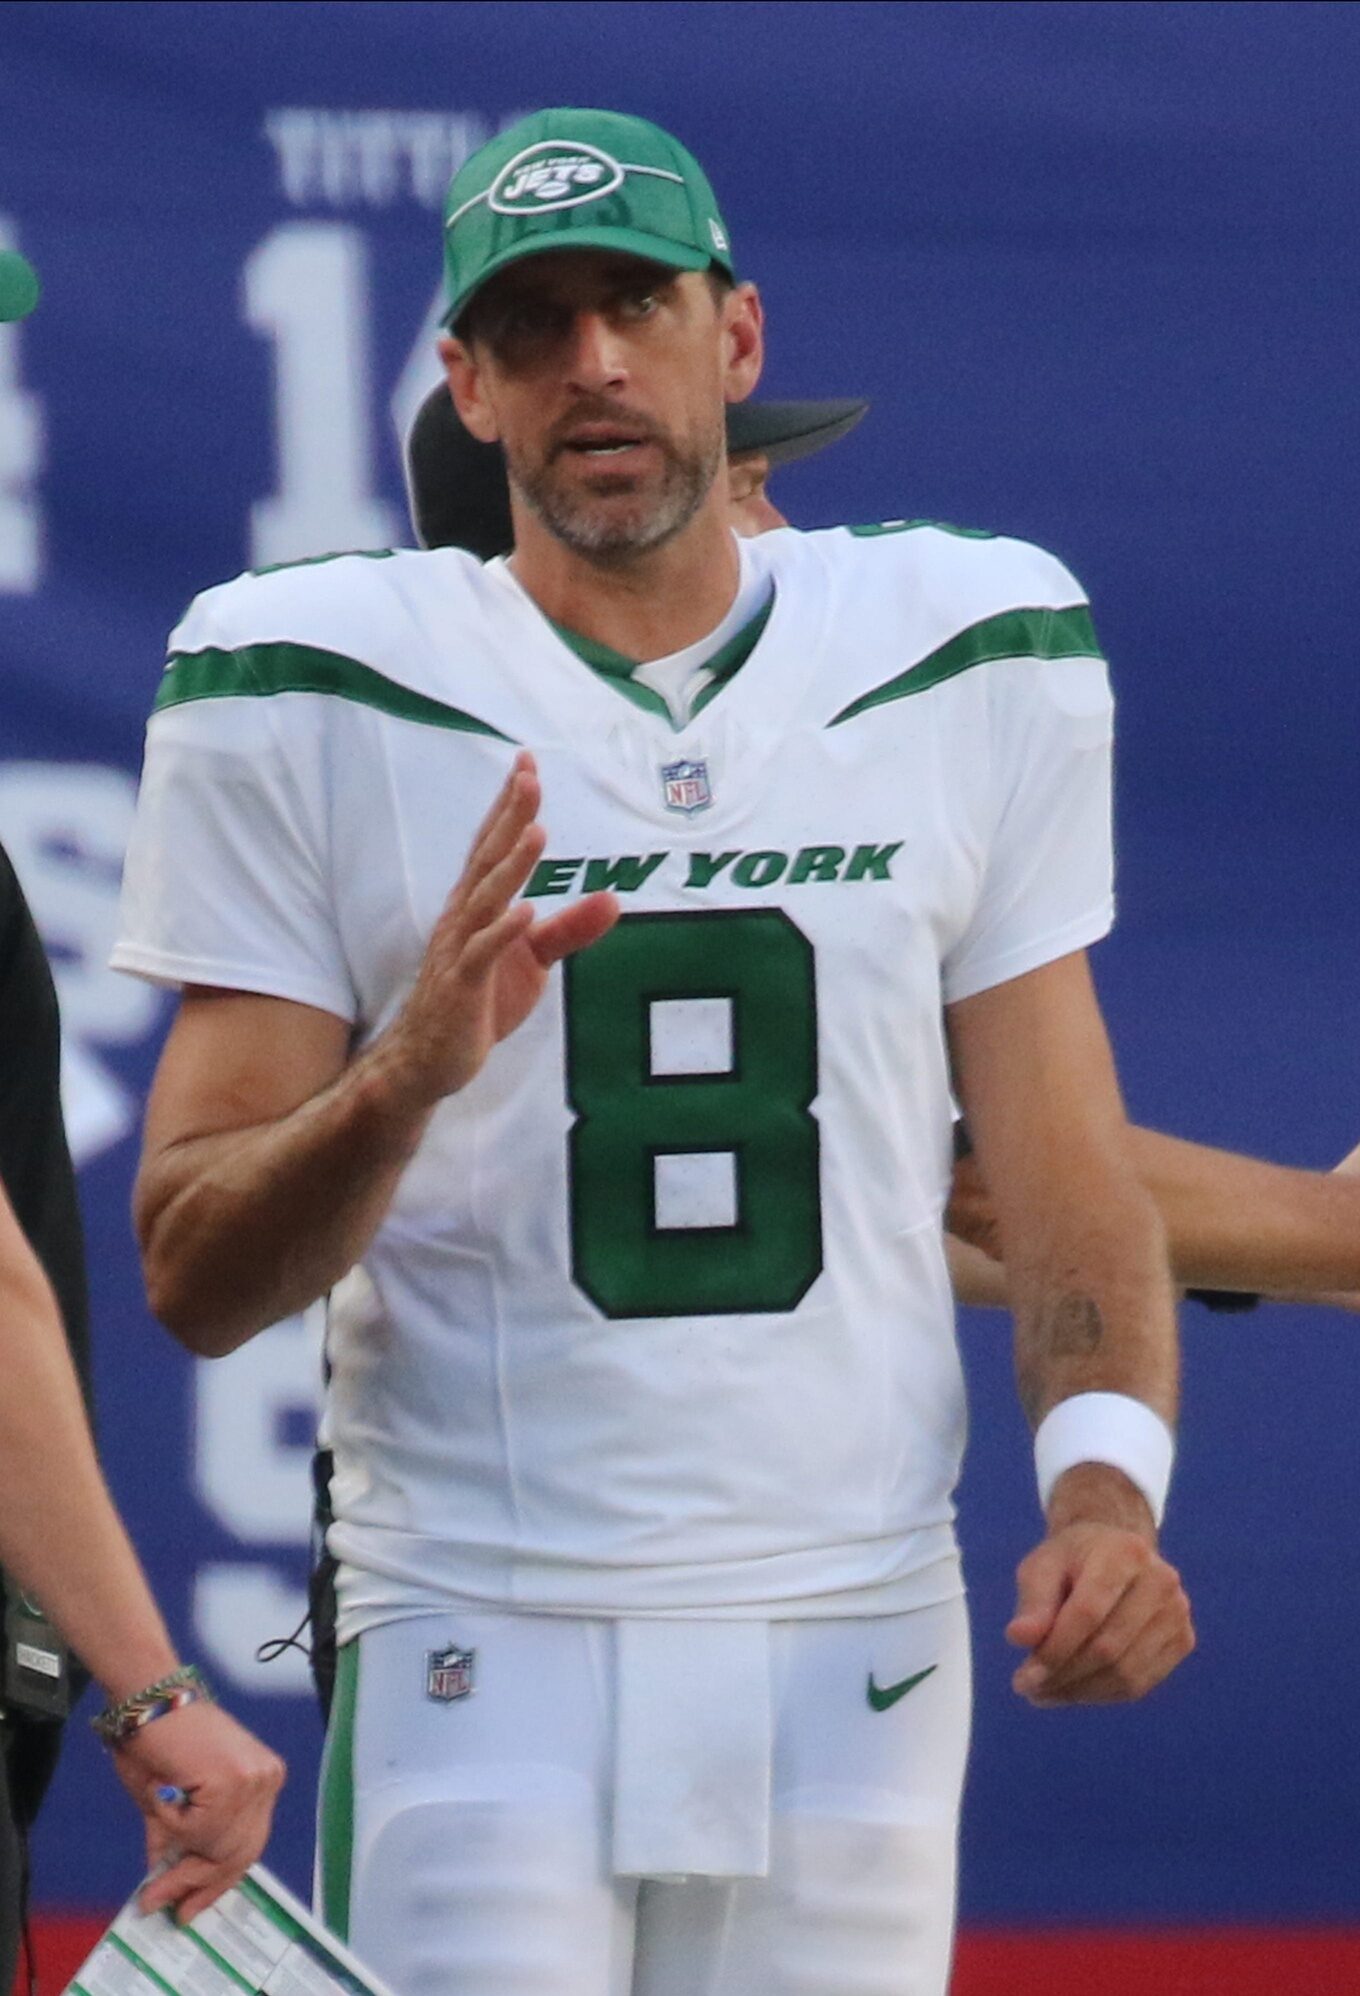 East Rutherford, NJ August 26, 2023 -- Jets offensive coordinator Nathaniel Hackett and Aaron Rodgers in the first half. The NY Jets against the NY Giants on August 26, 2023 at MetLife Stadium in East Rutherford, NJ, as the rivals play their final preseason game before the start of the NFL season. © Chris Pedota, NorthJersey.com / USA TODAY NETWORK